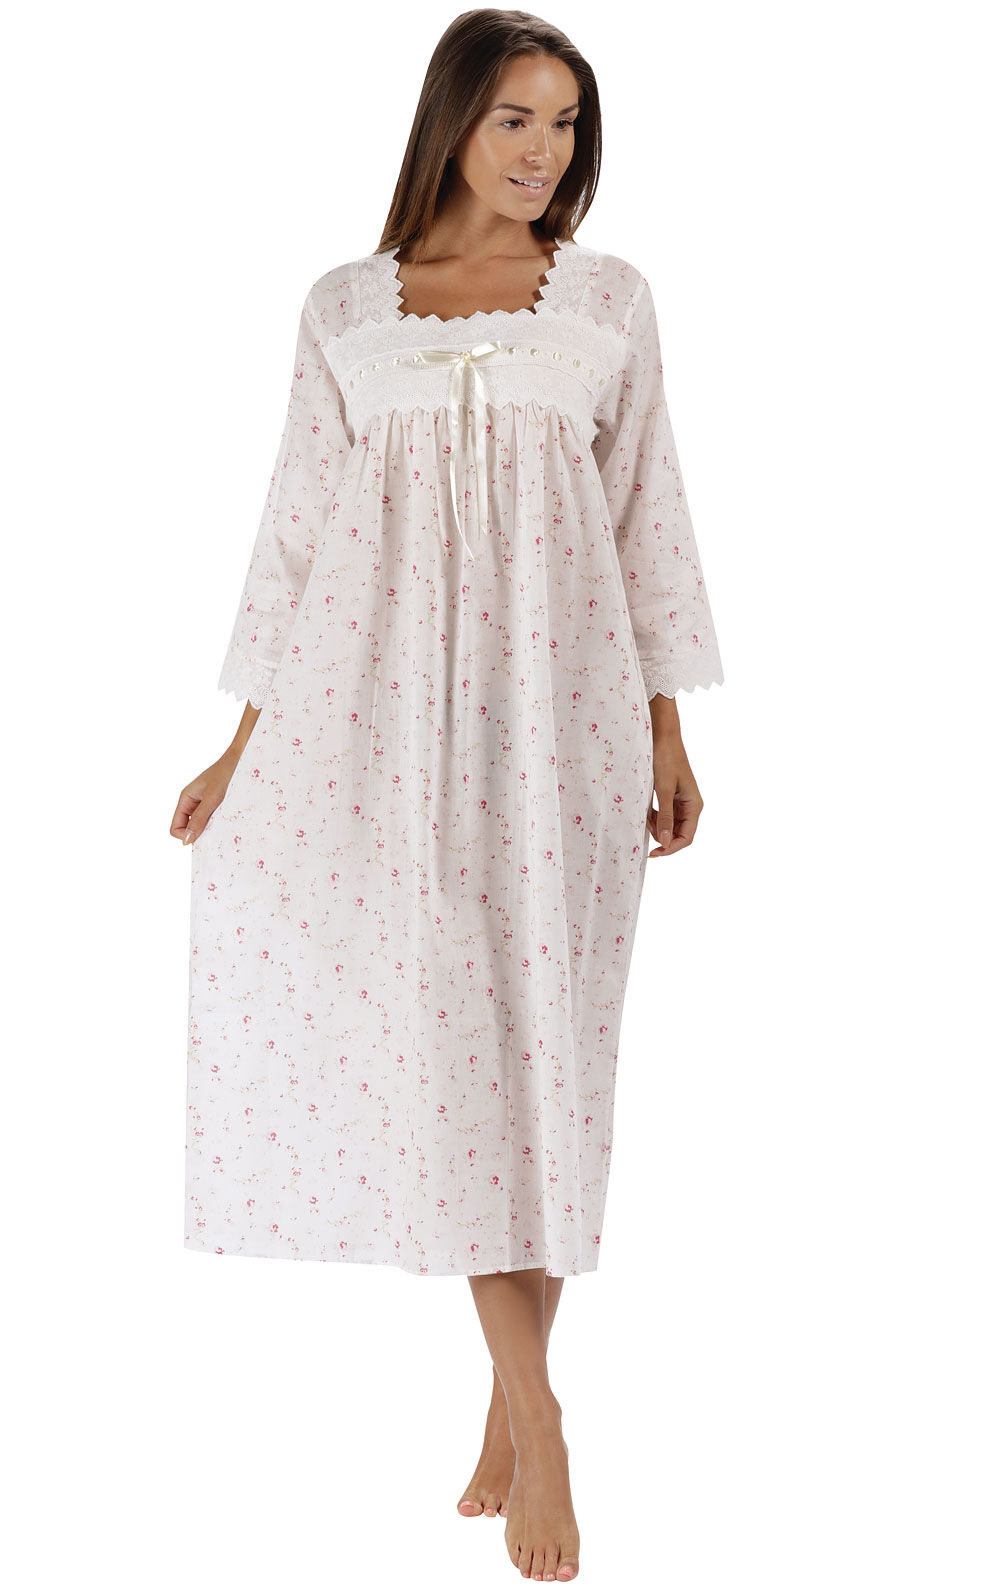 Calida Cotton Knit Nightgown - Womens Long Sleeve Sleep Gown